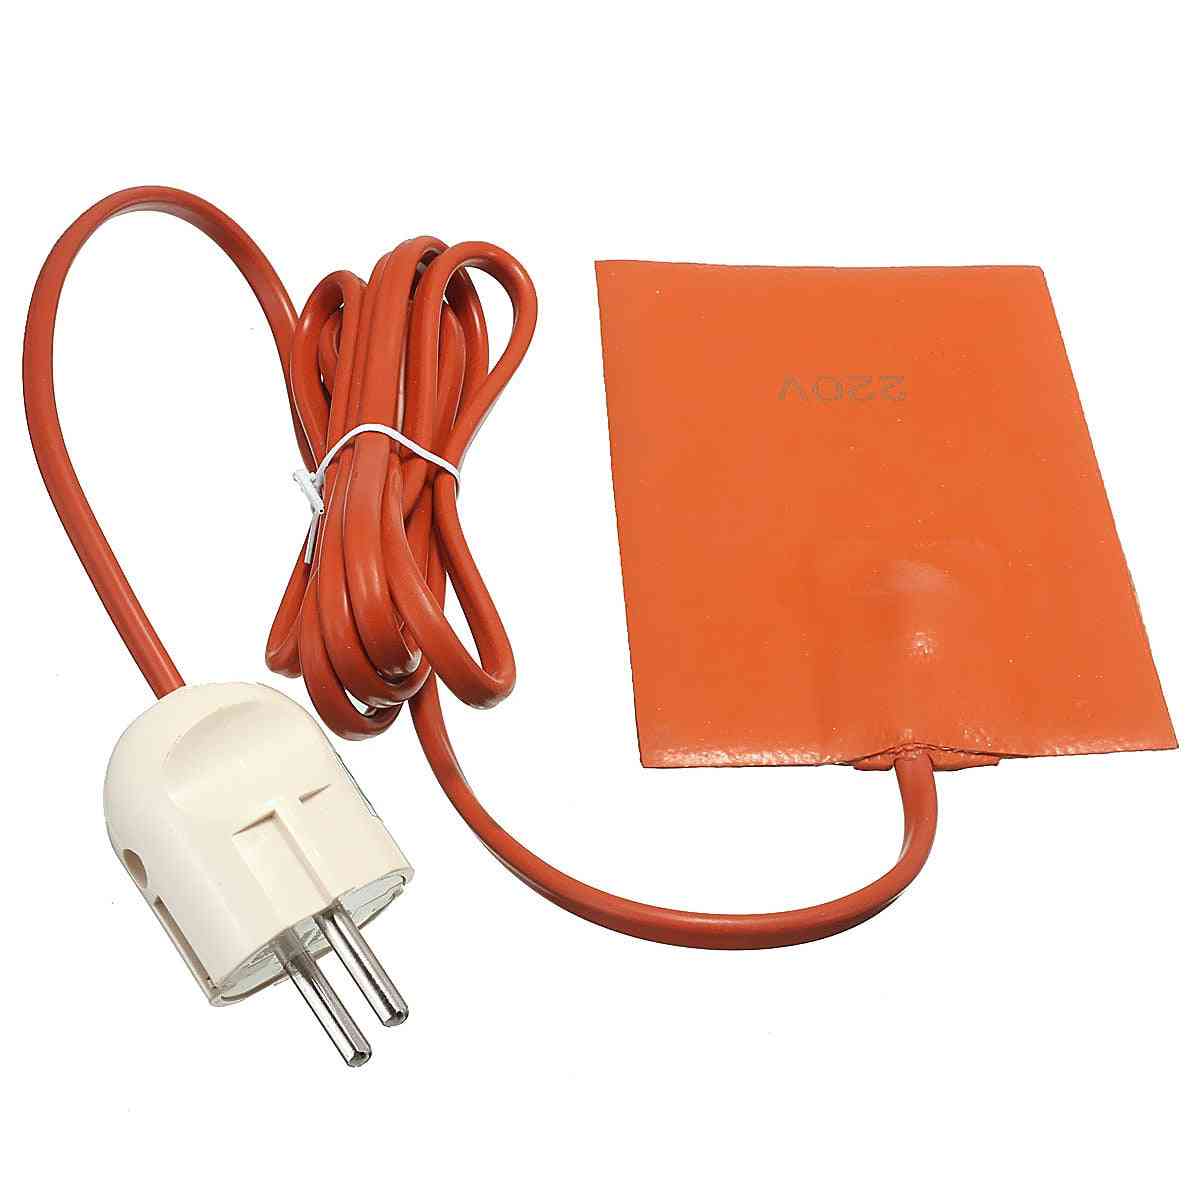 Car Engine, Oil Tank Heater, Silicone Heating Pad, Wear Protect With Eu Plug